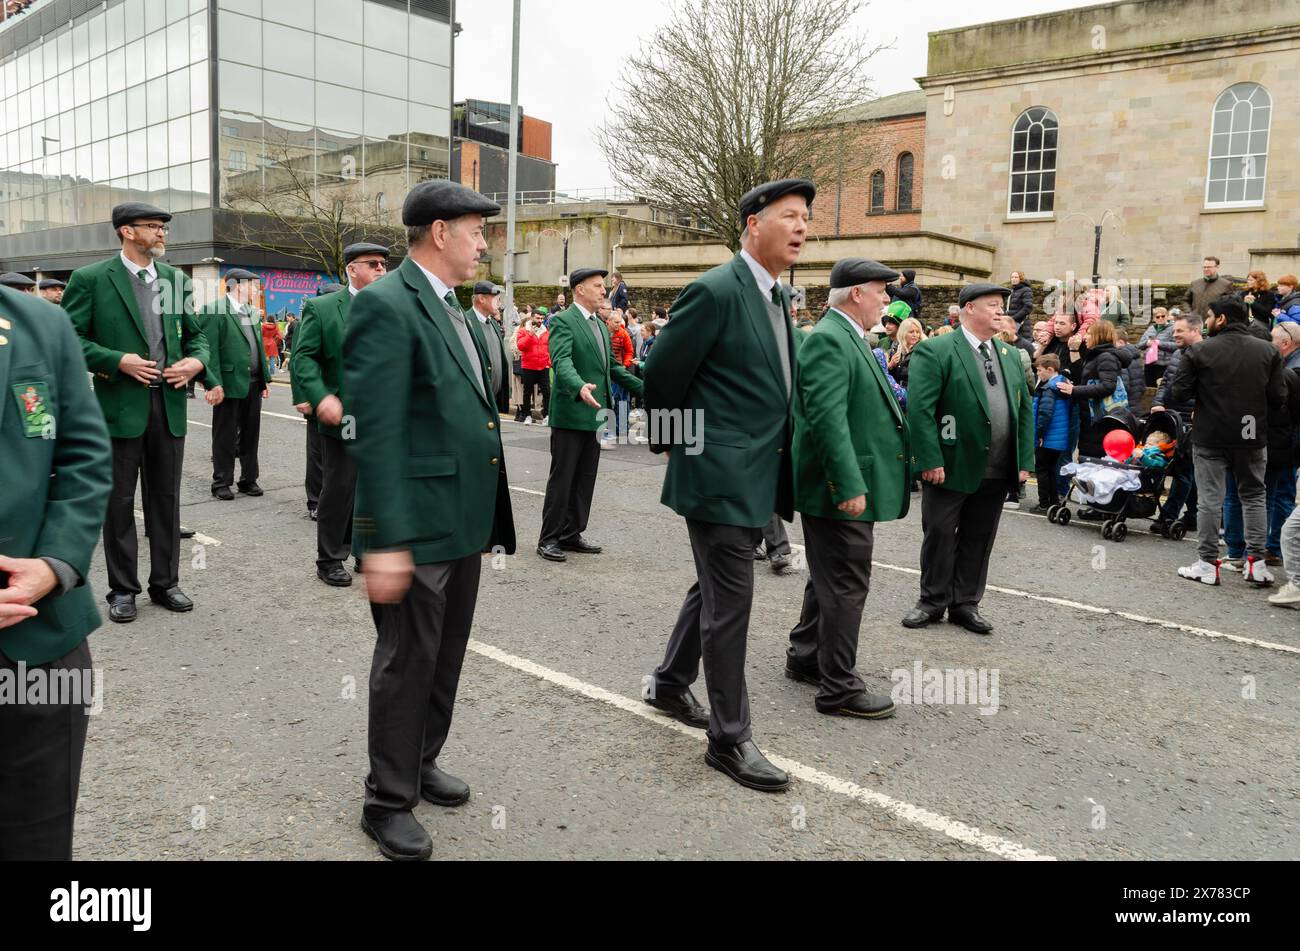 Belfast, County Antrim, Northern Ireland March 17 2024 - Men of the Friendly sons of the Shillelagh New Jersey in St Patrick's parade Belfast Stock Photo